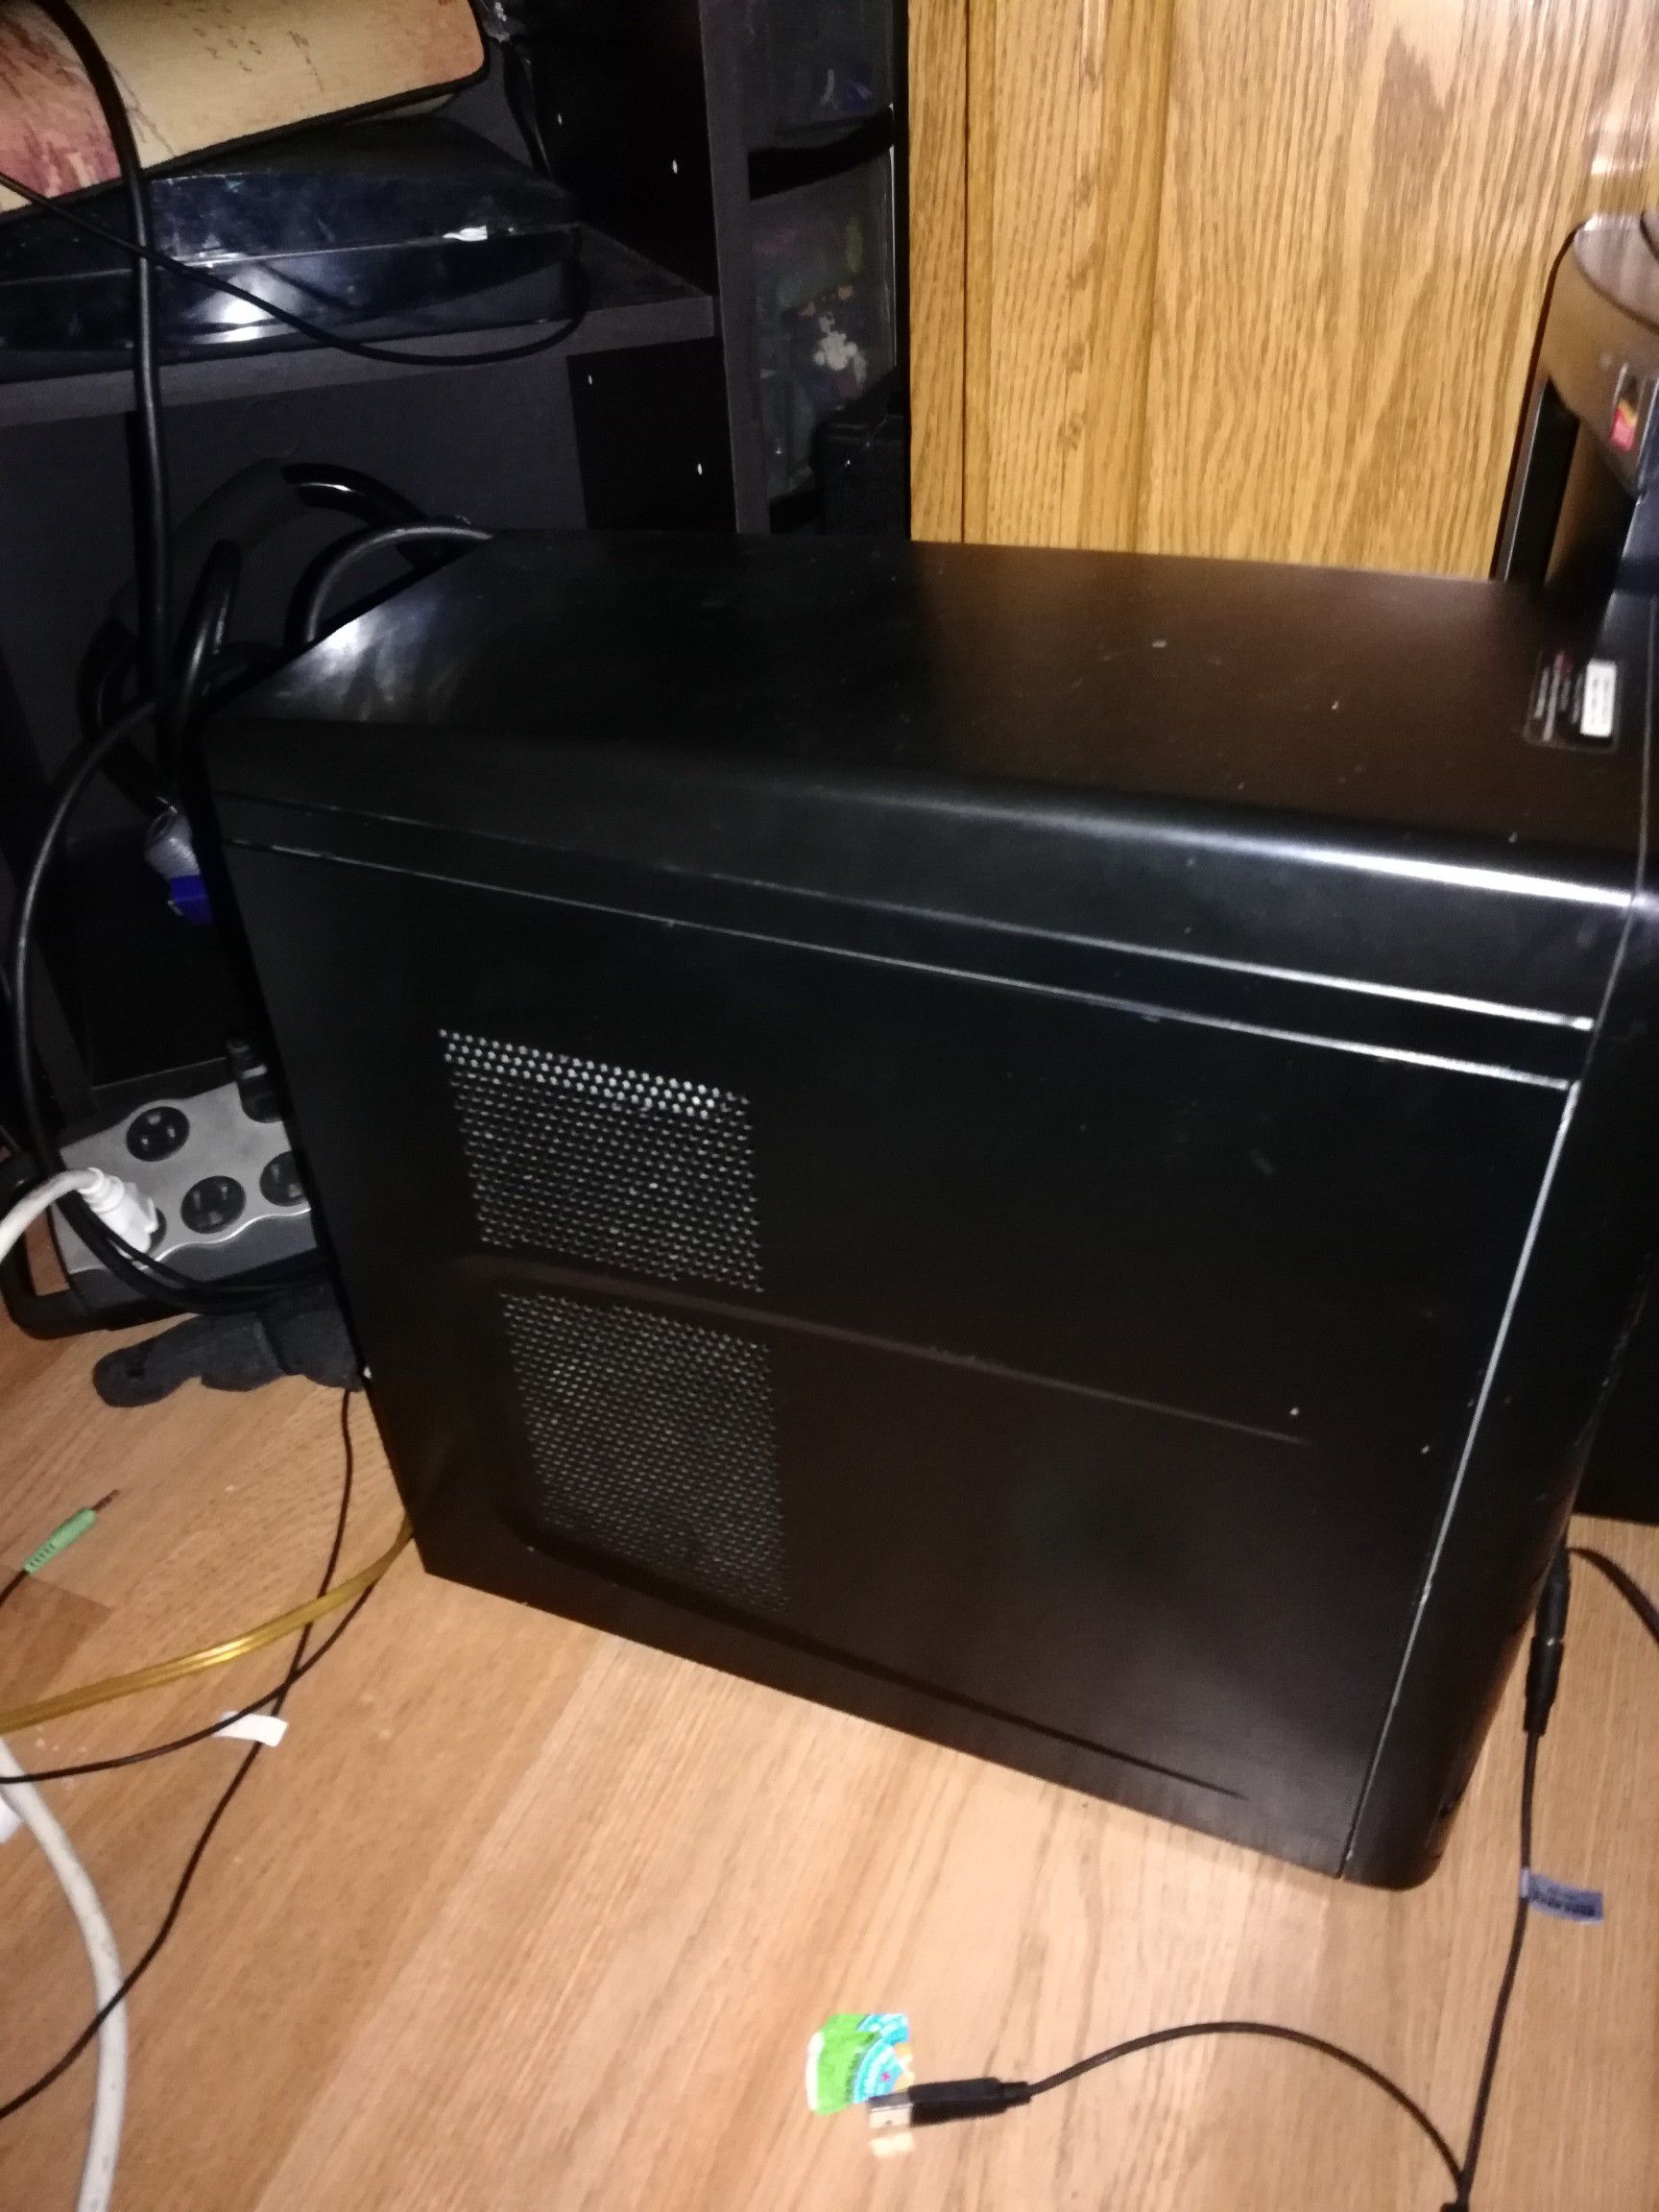 *desc*VERY ENTRY LEVEL GAMING PC